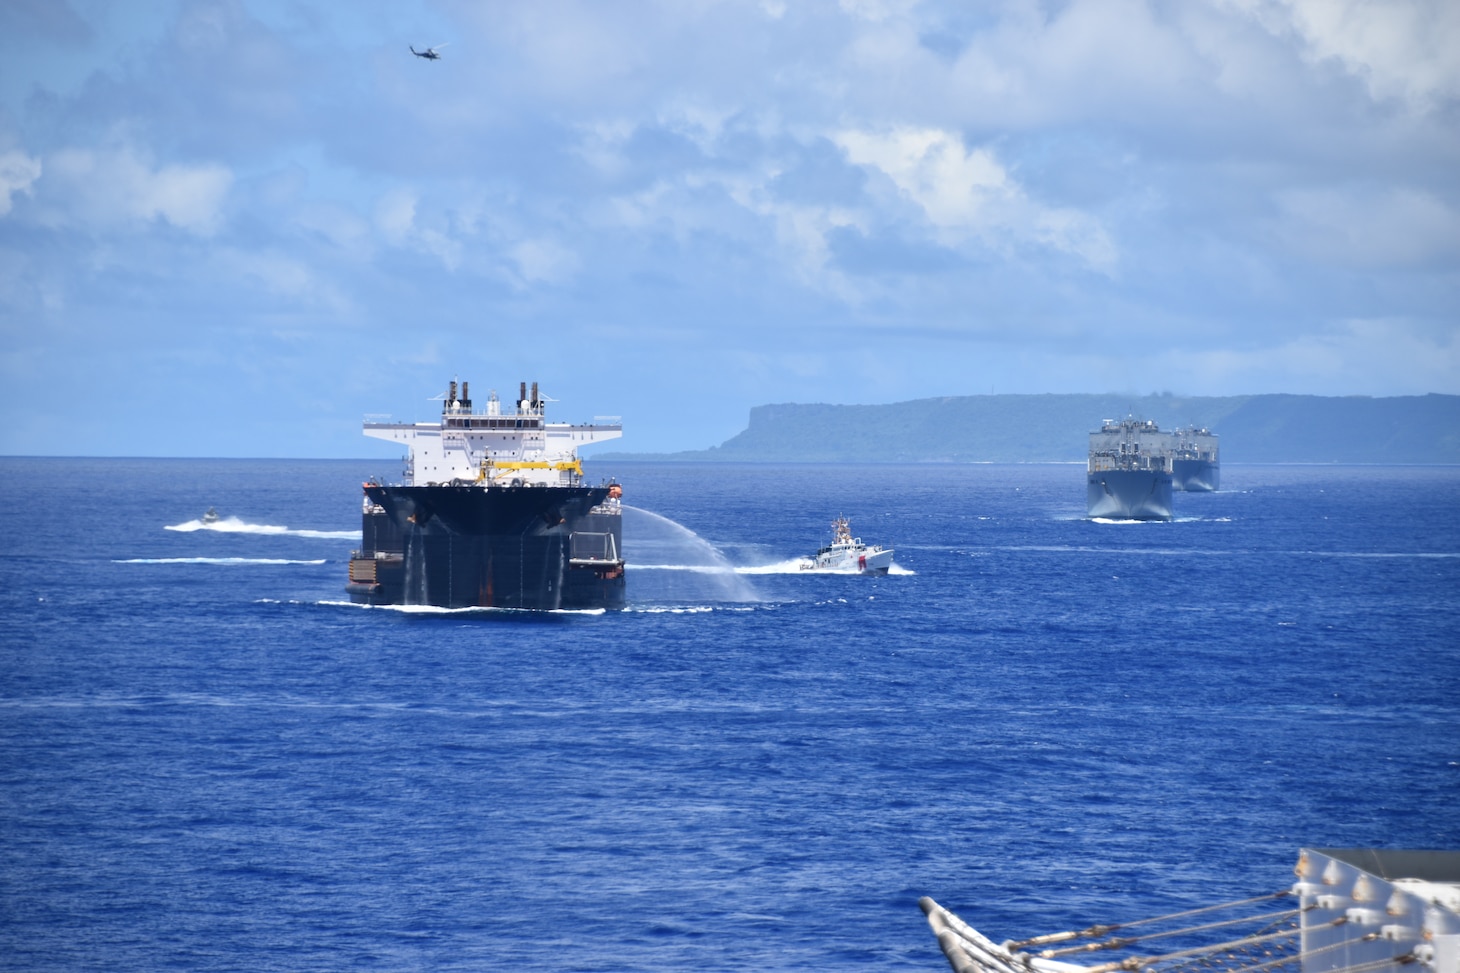 While steaming in a formation near Guam, USNS Montford Point employs their hose, a pre-planned response, which it might use during convoy operations.  Pictured from left are:  a Coastal Riverine Group 1’s mark VI boat, USNS Montford Point (T-ESD 1), U.S. Coast Guard Cutter Myrtle Hazard (WPC-1139), USNS Red Cloud (T-AKR 313), USNS Watkins (T-AKR 315), and in the air, an MH-60R from Helicopter Sea Combat Squadron 25.